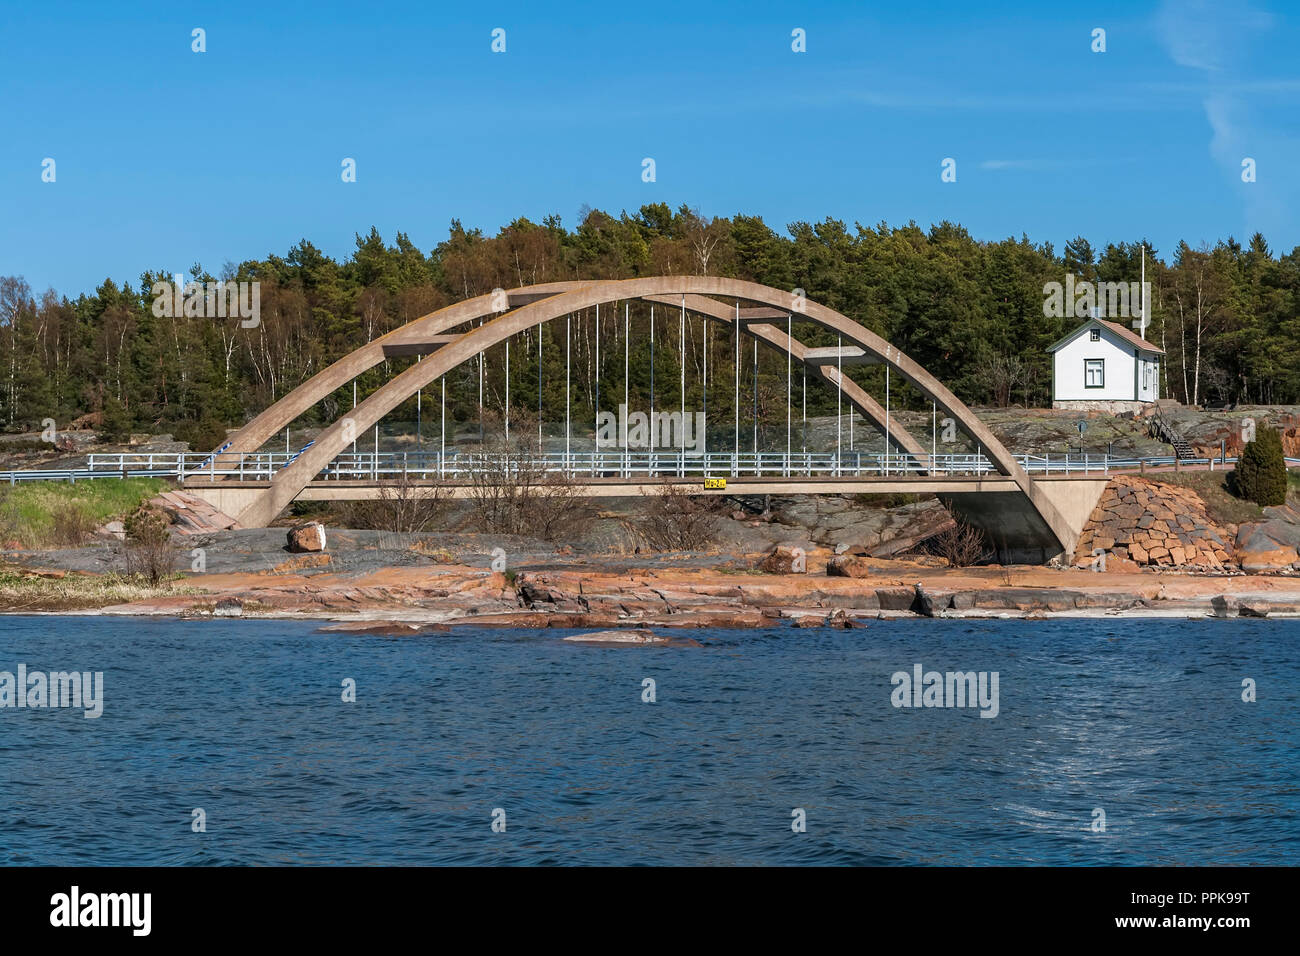 Arch bridge across the strait between the islands of the Aland Stock Photo